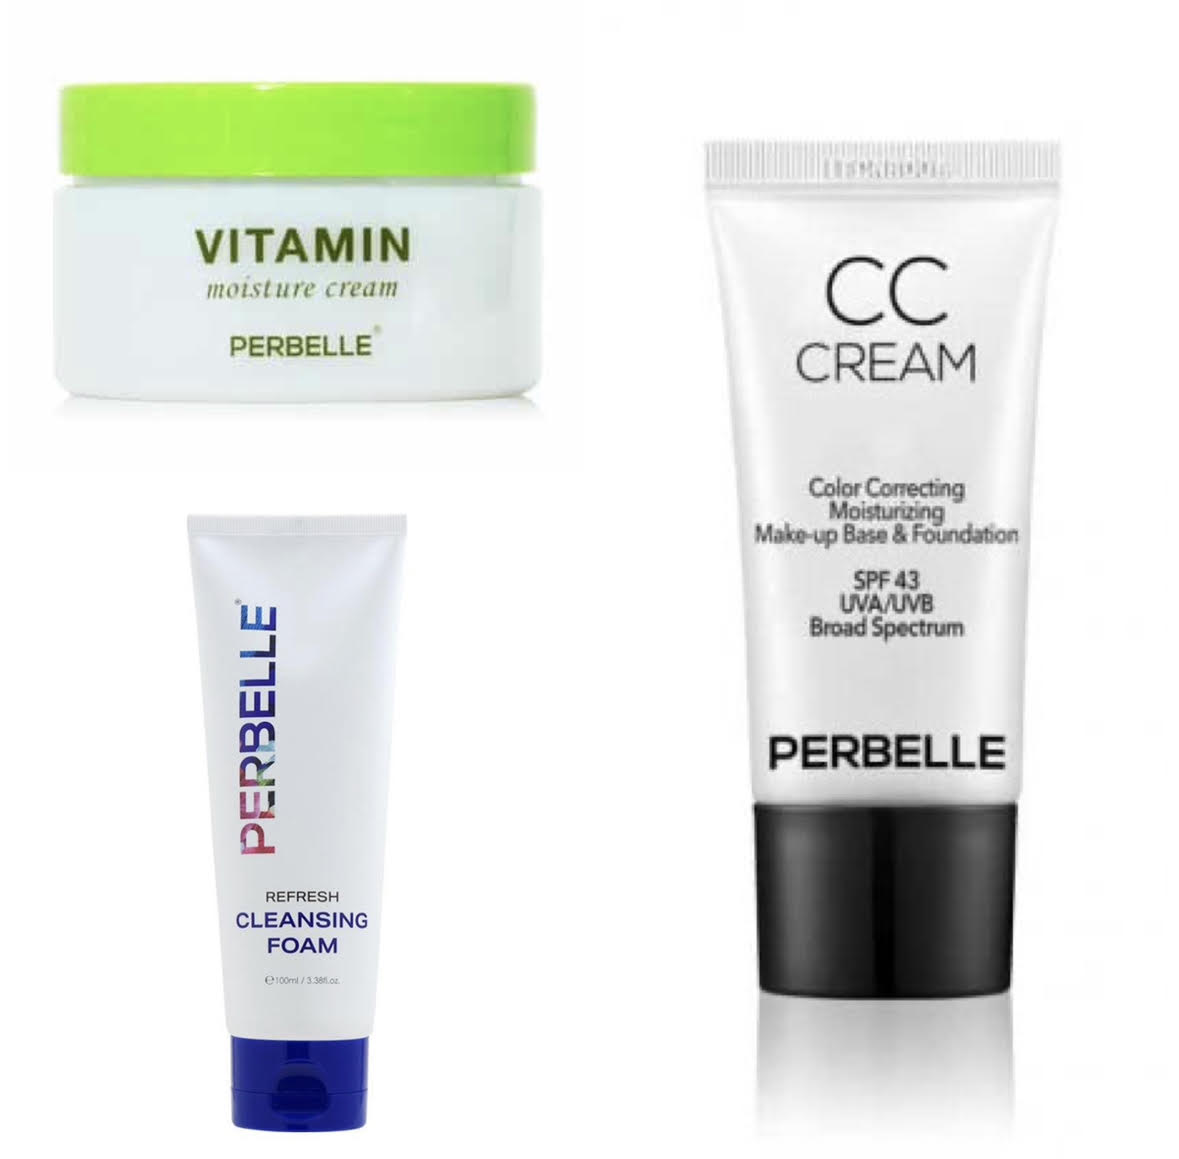 Perbelle CC Cream: Why It Is Essential For Winter Skin Care